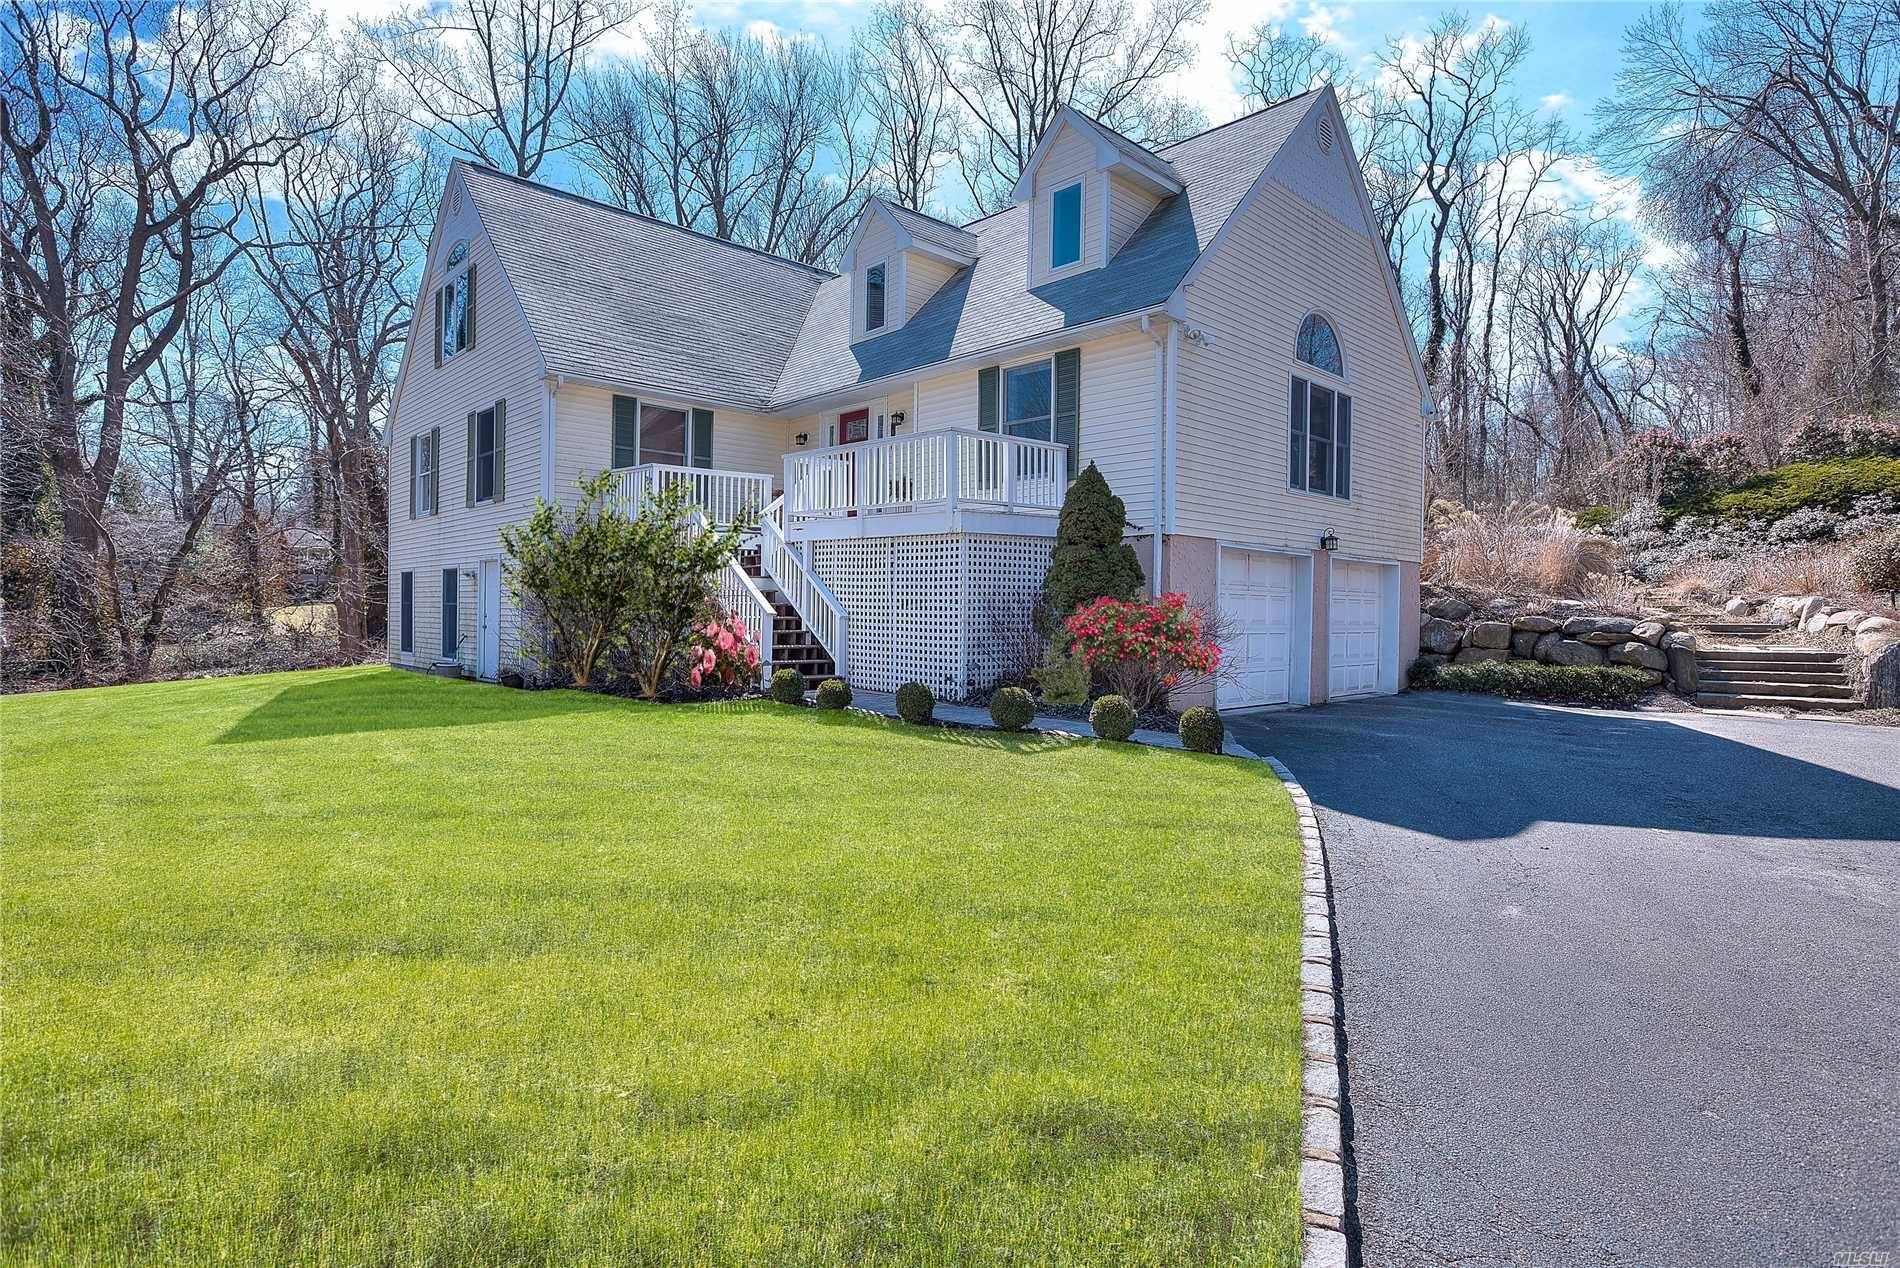 A Private Drive Leads To This Impeccable 4 Bedroom, 3.